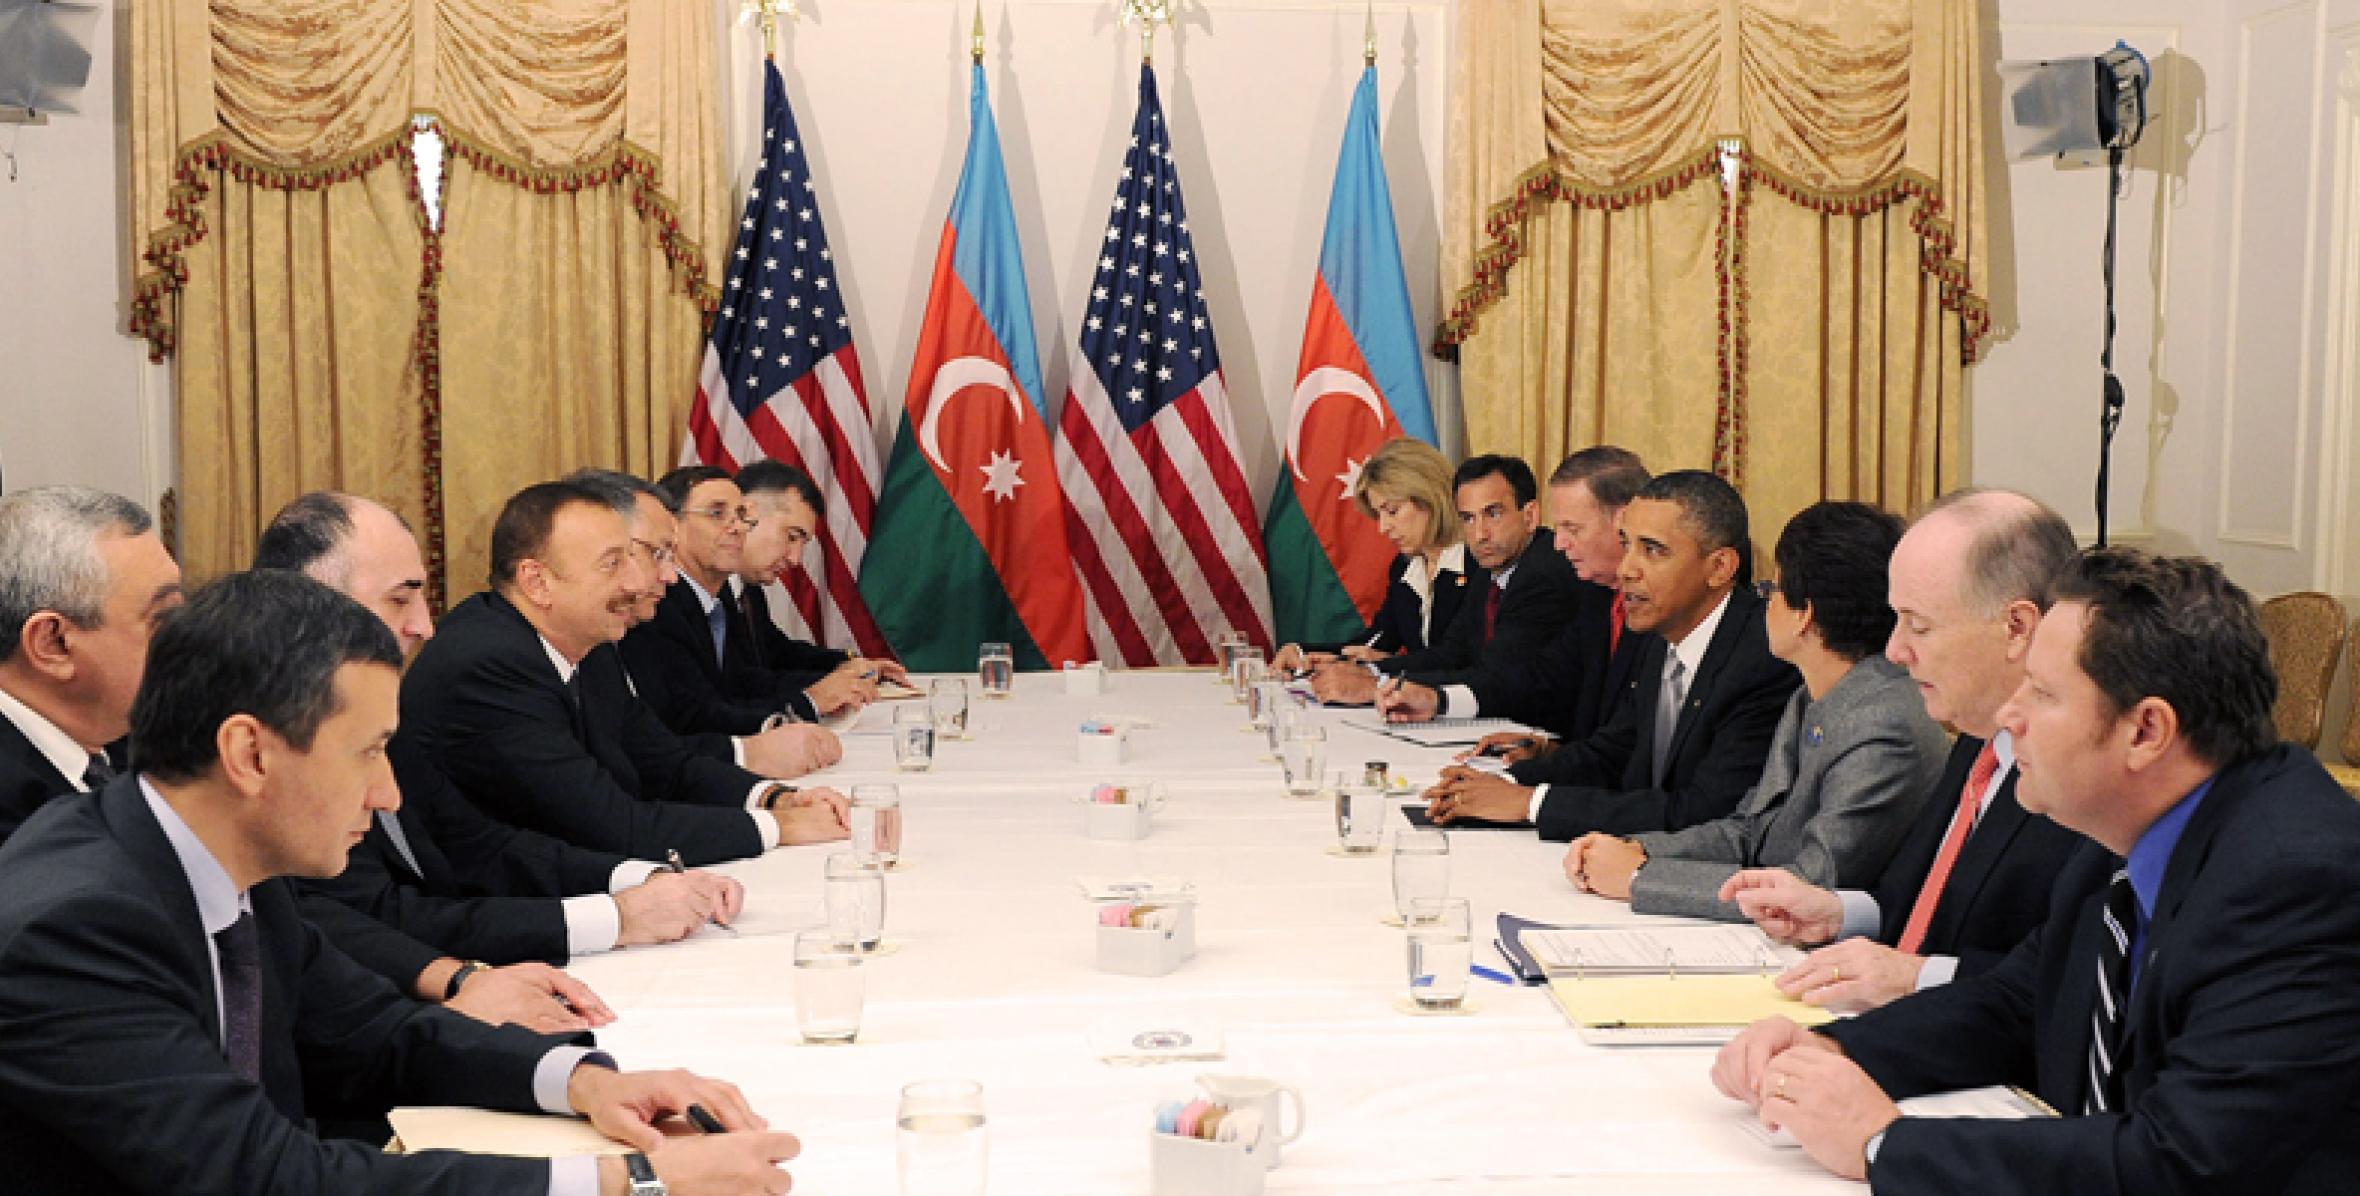 Ilham Aliyev and President of the United States Barack Obama had a meeting